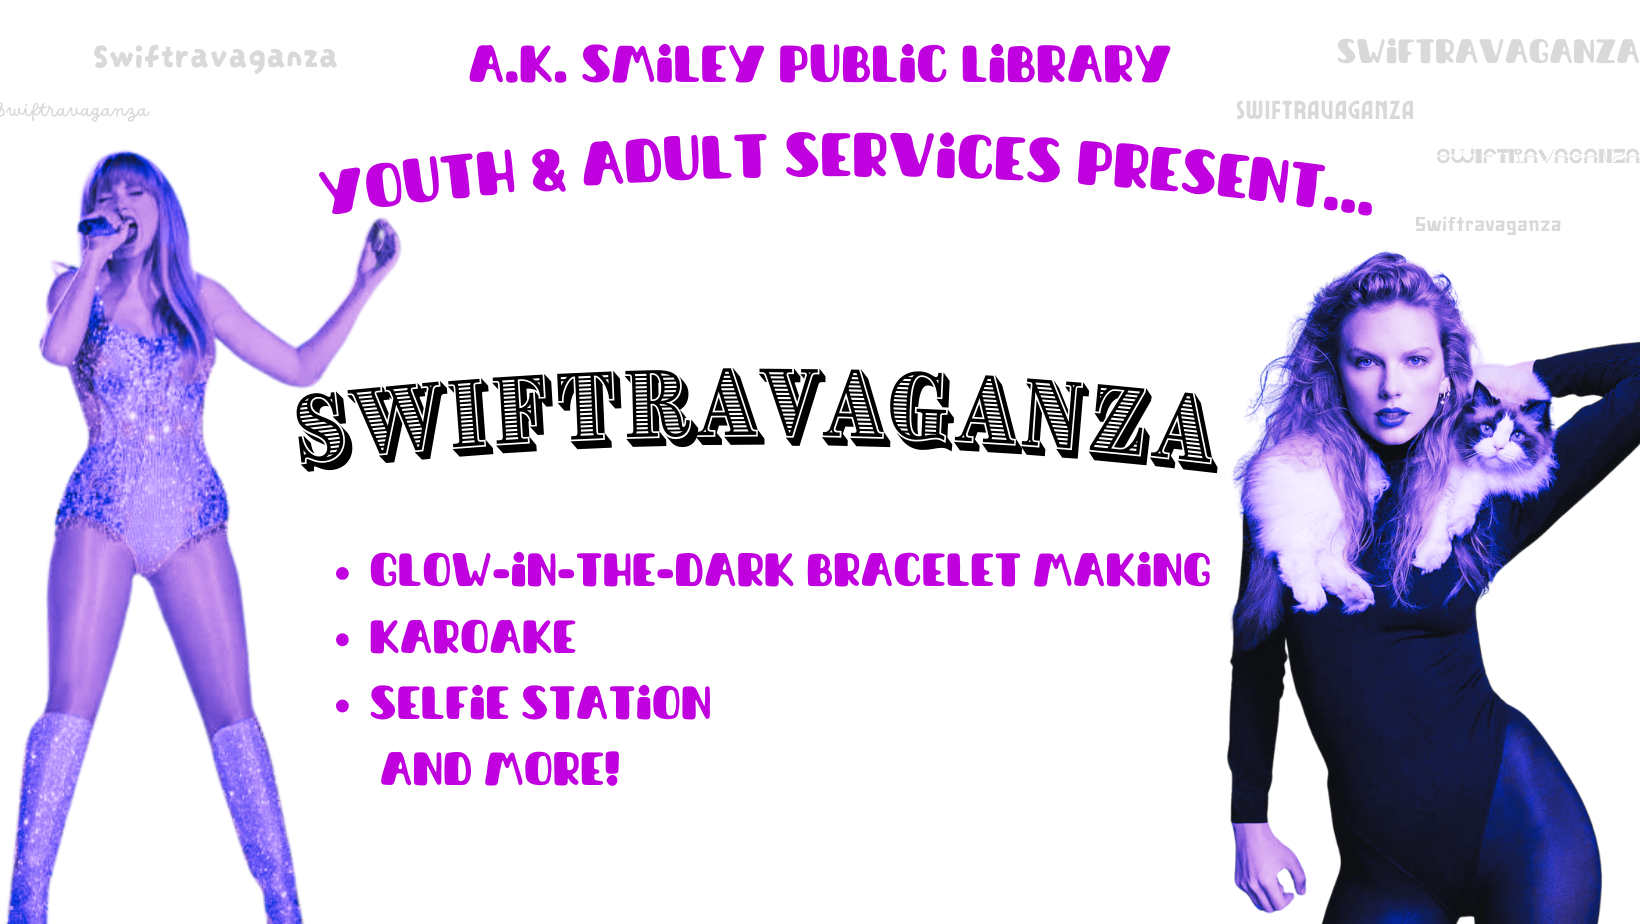 Swiftravaganza at A.K. Smiley Public Library...All ages welcome!